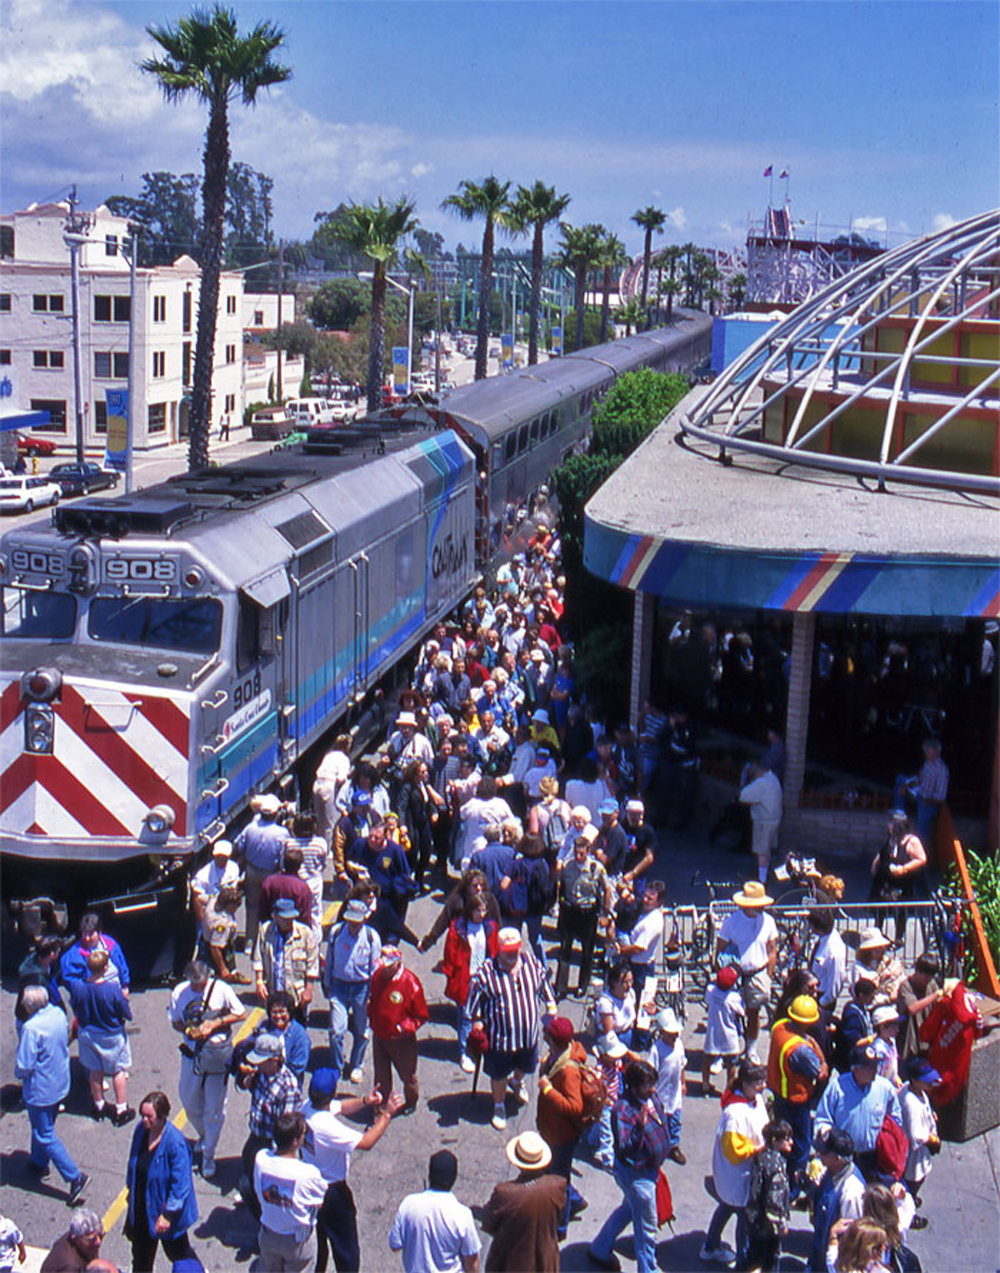 color photo of train with crowd and palm trees